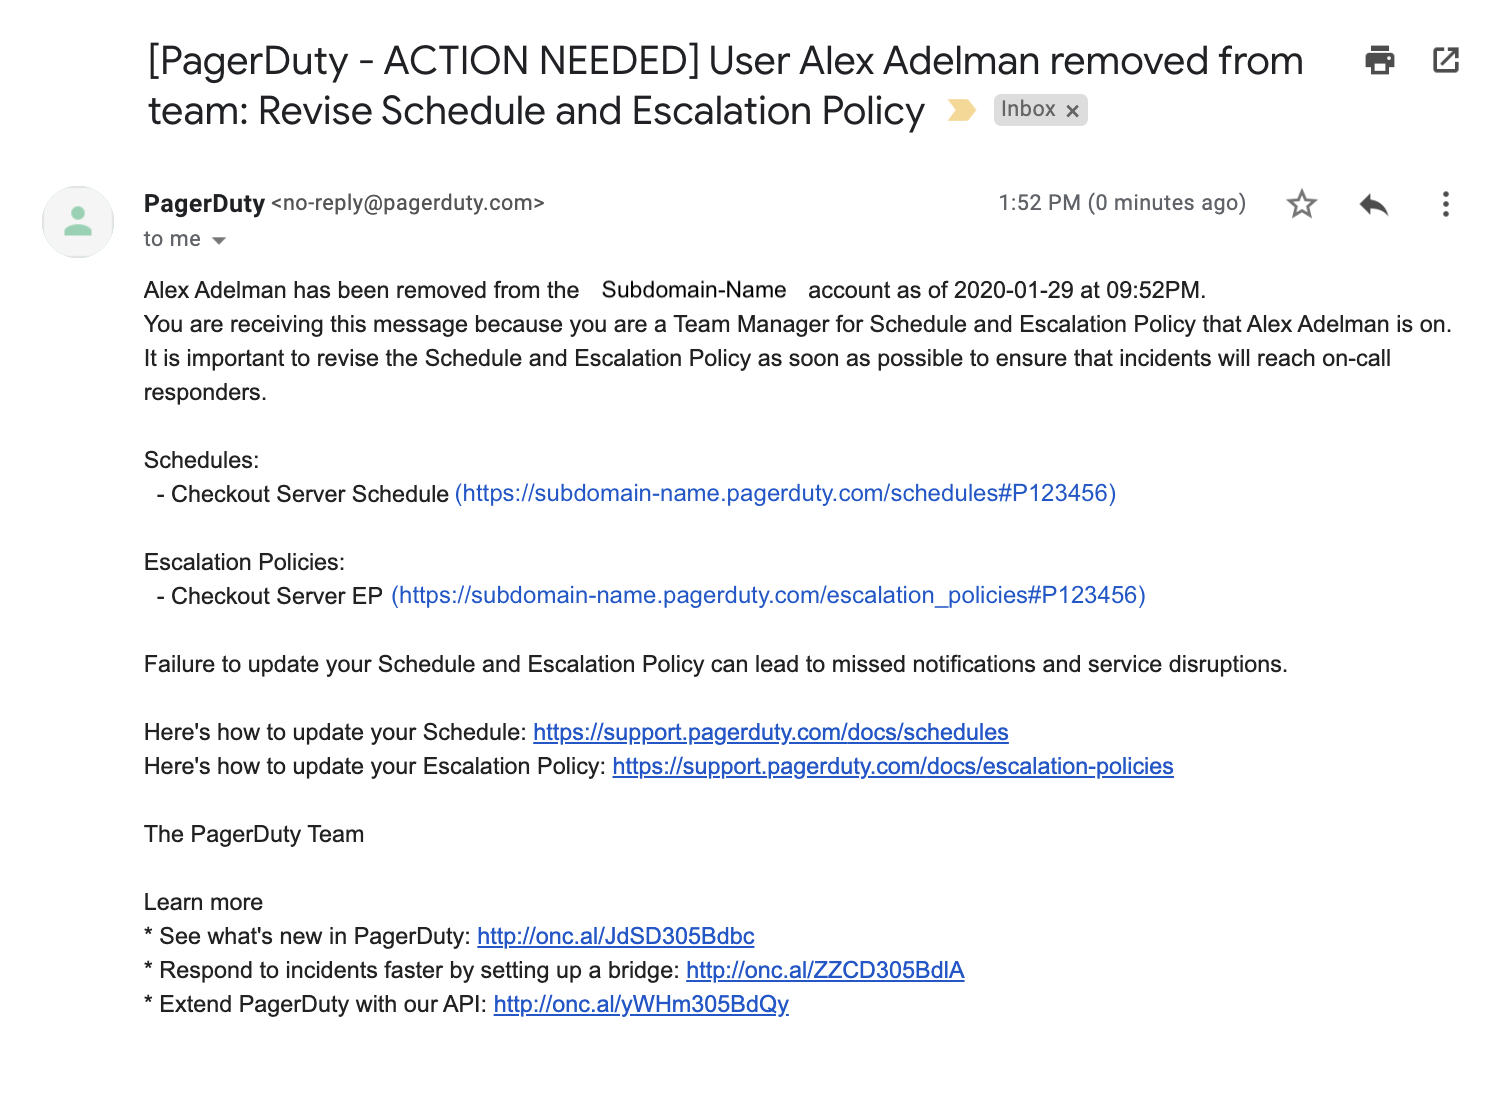 Email notification that a user was removed